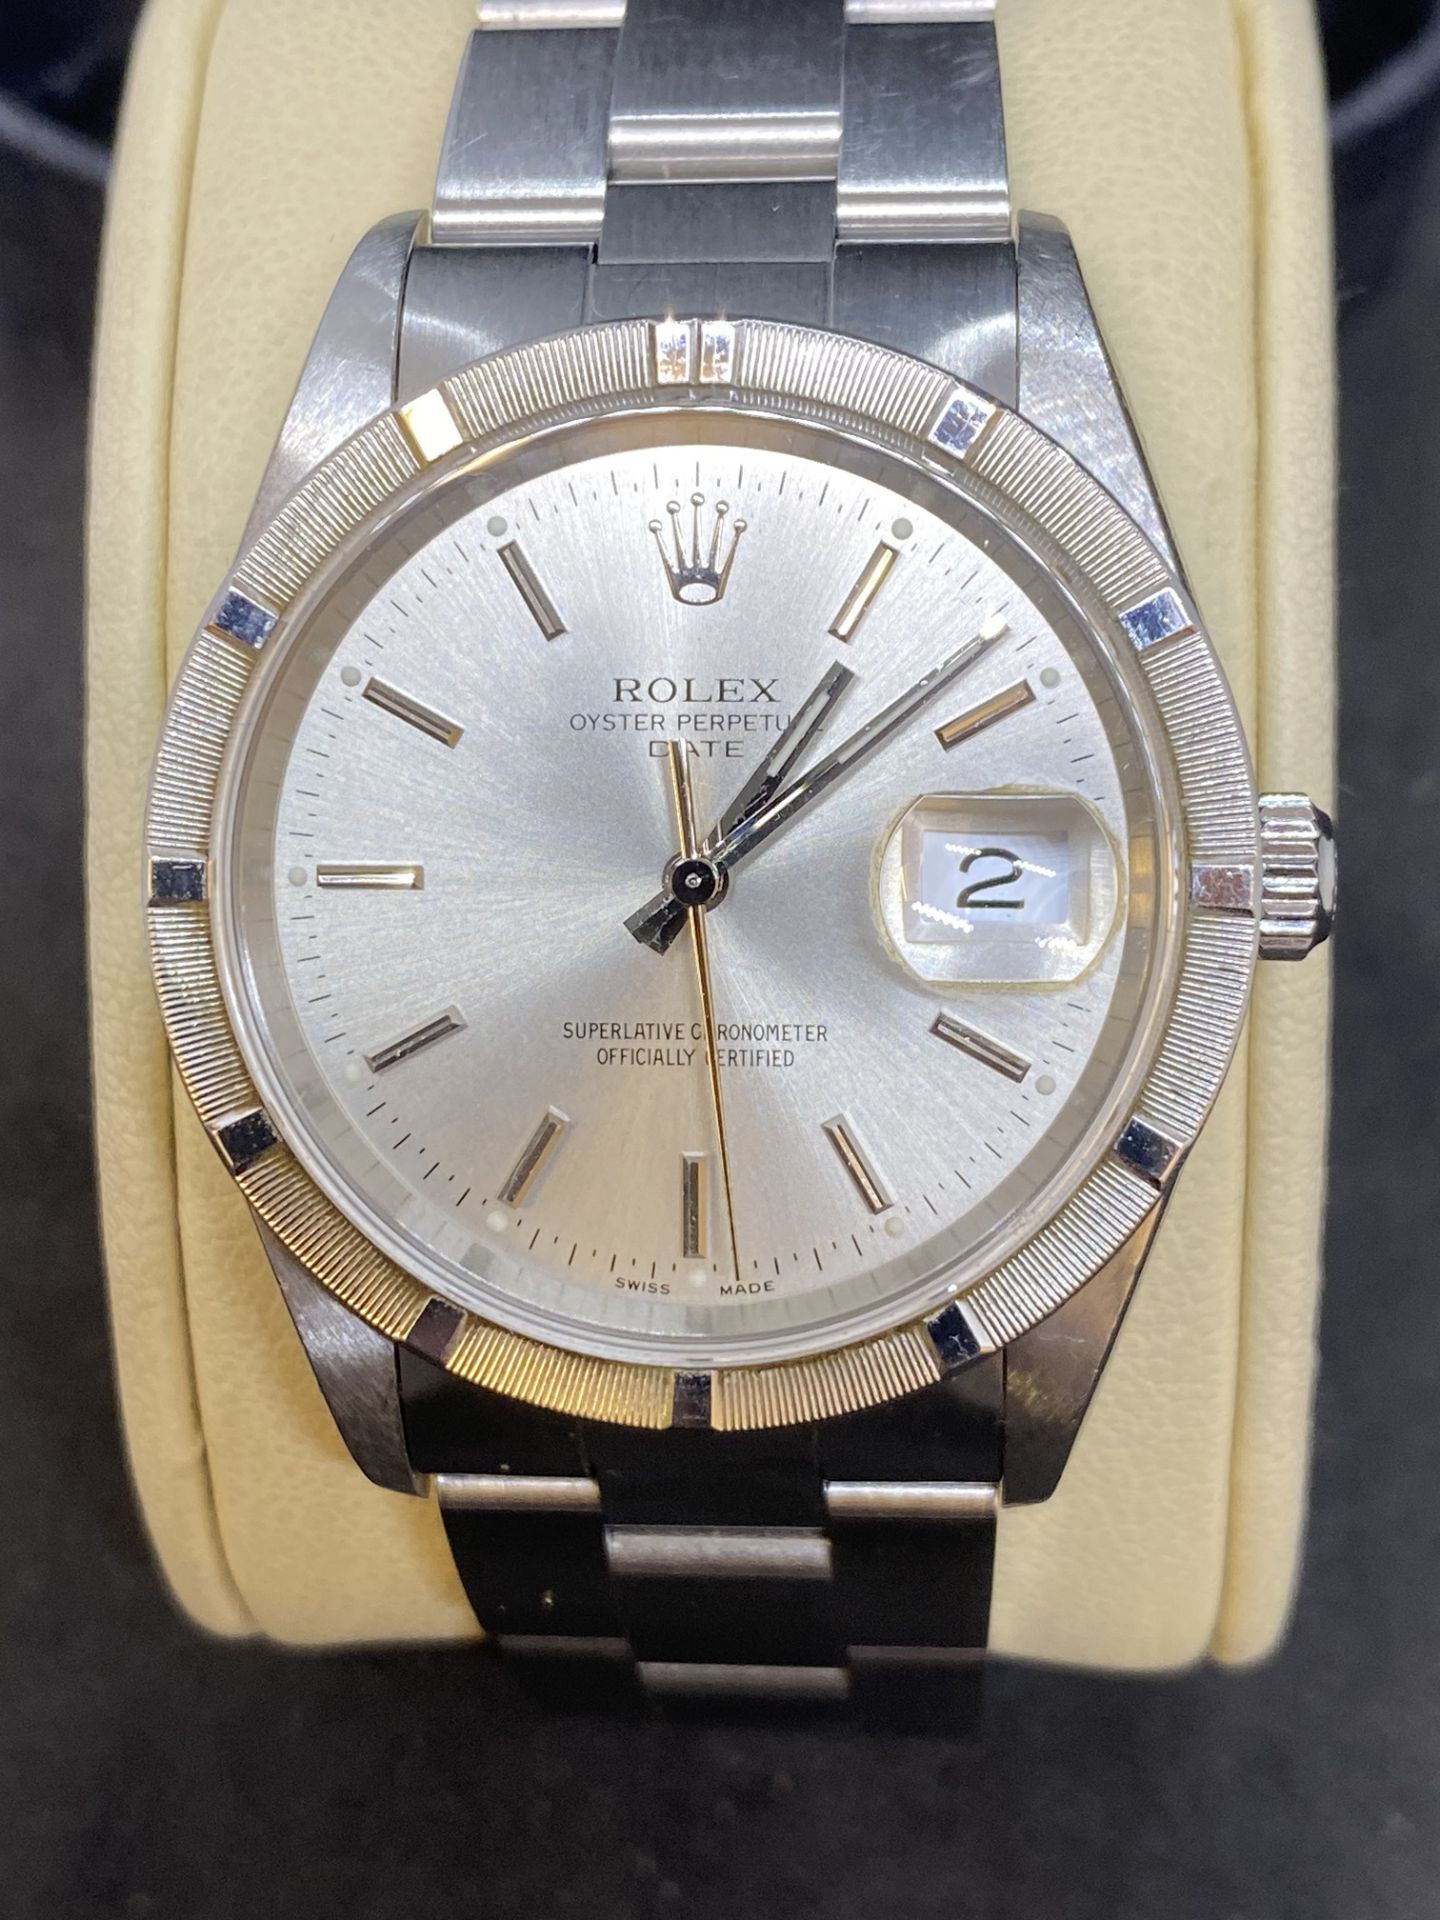 ROLEX OYSTER PERPETUAL DATE STAINLESS STEEL WATCH - Image 3 of 8